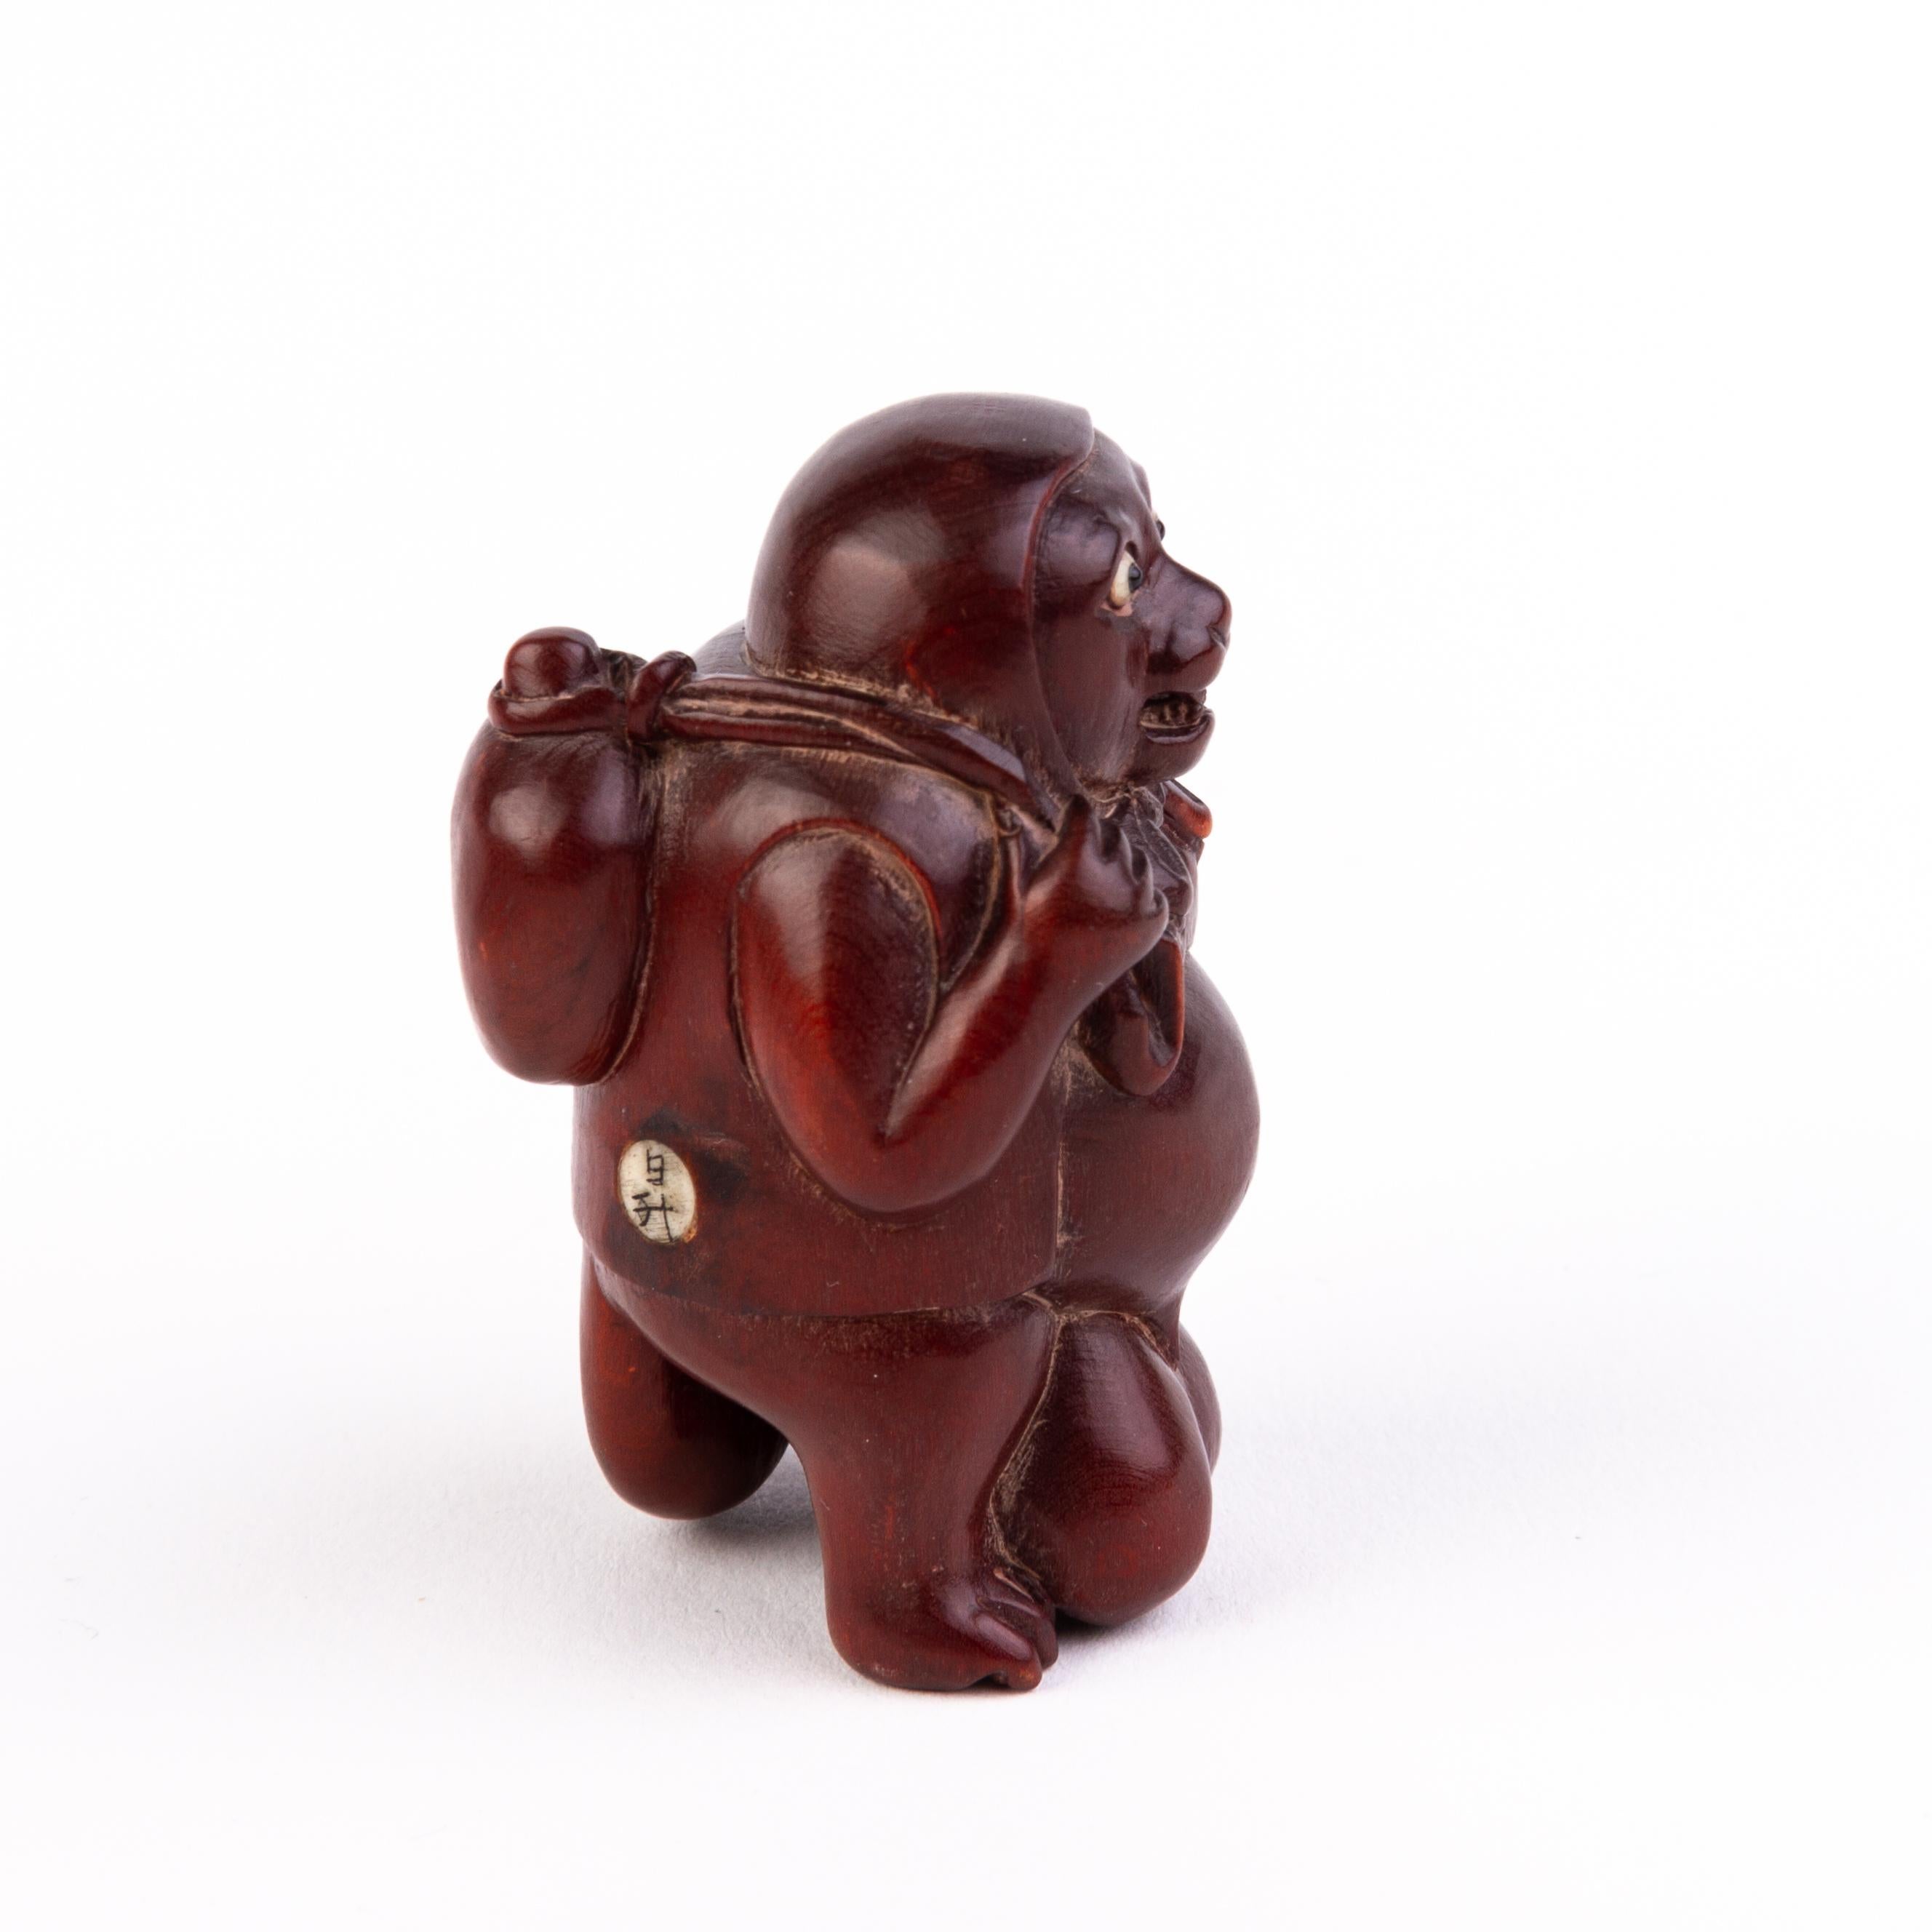 In good condition
From a private collection
Free international shipping
Signed Japanese Boxwood Netsuke Inro